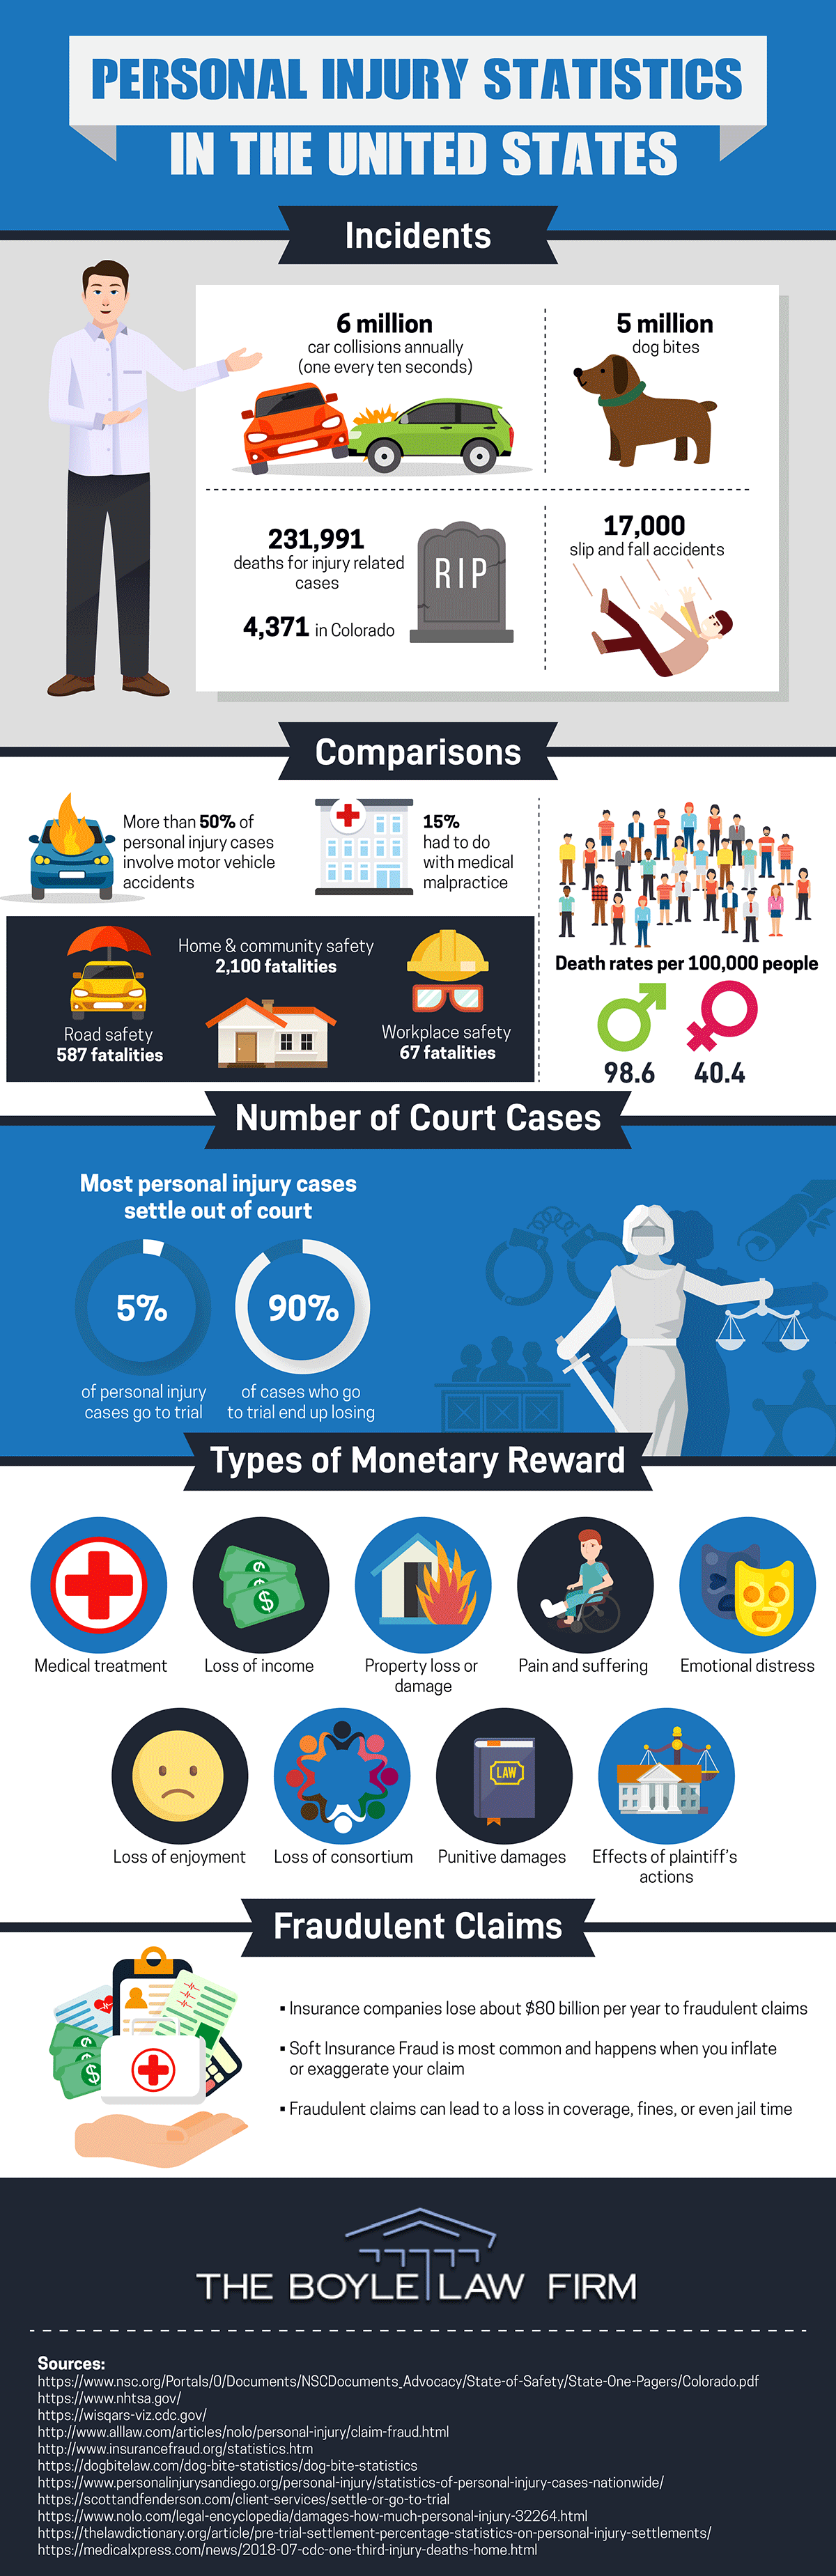 Personal Injury Statistics in the United States of America InfoGraphic